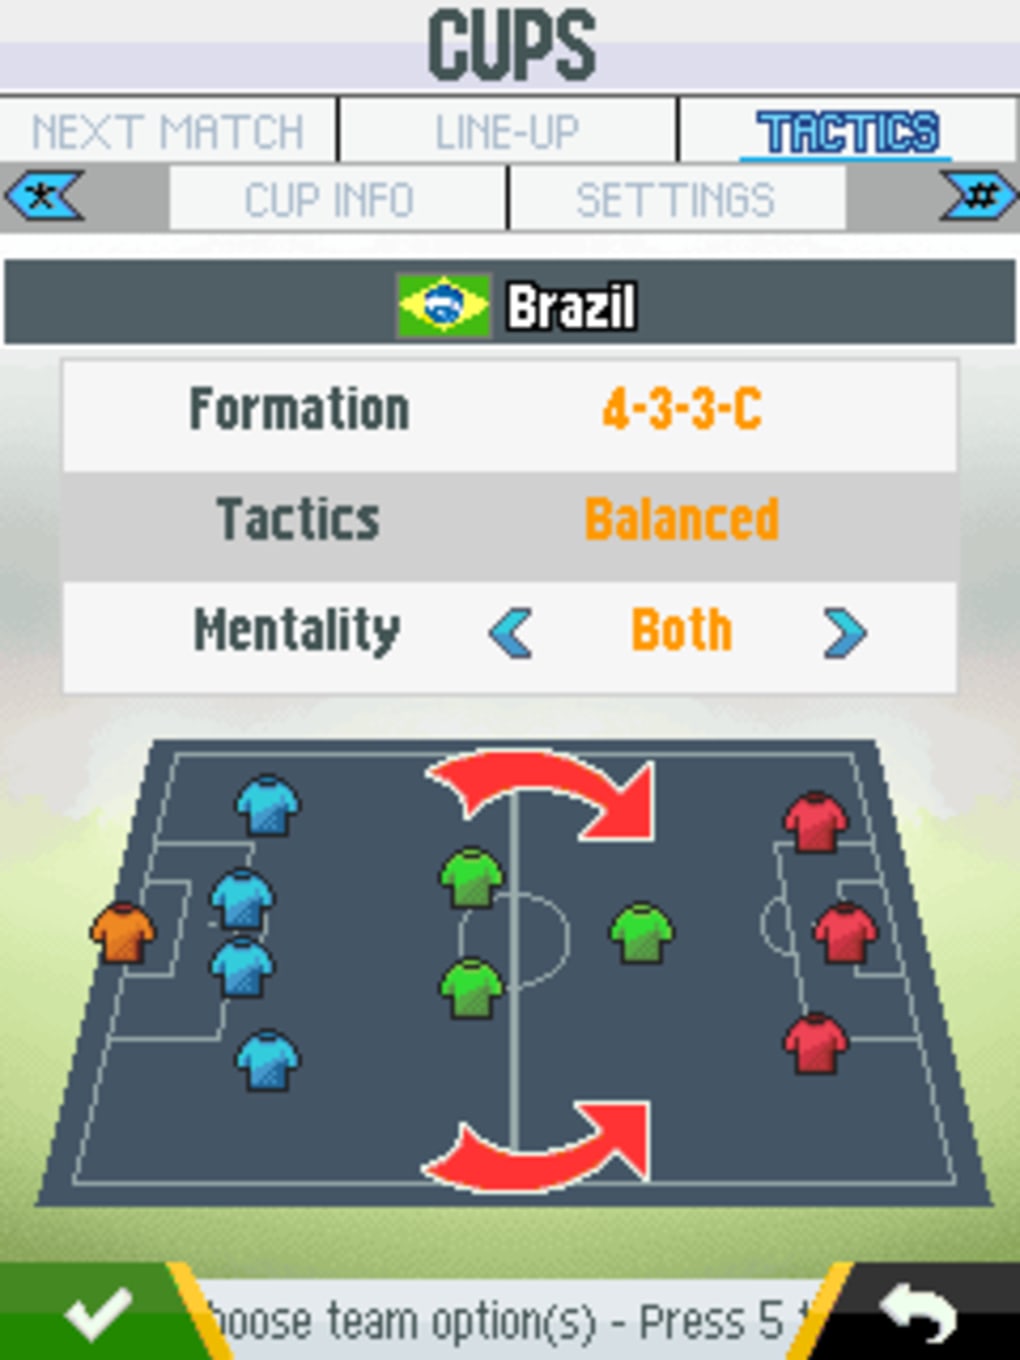 download real football manager 2012